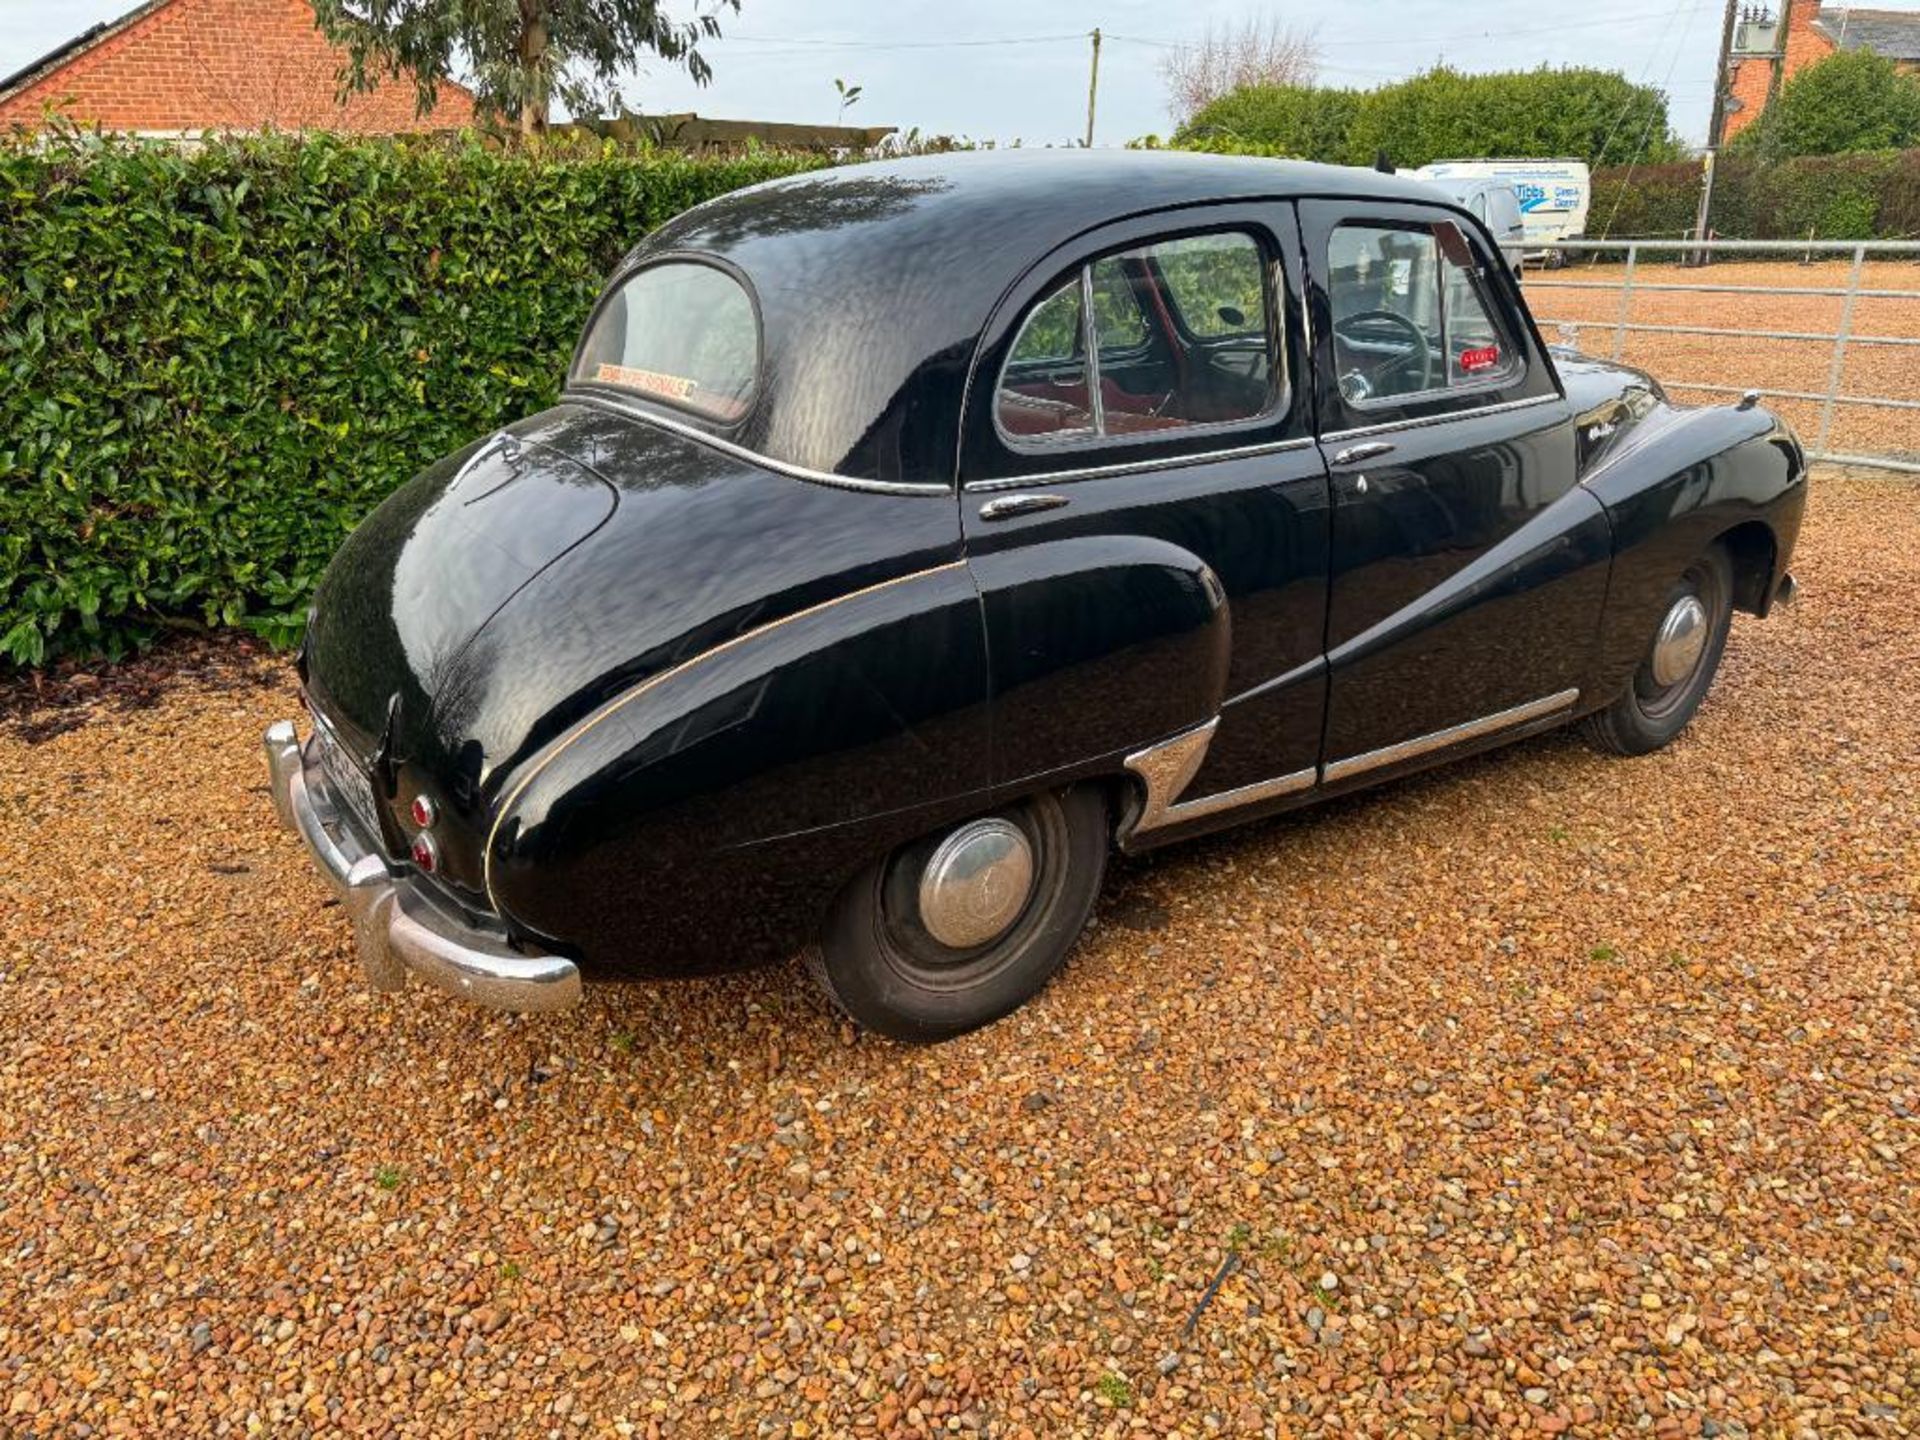 1954 Austin A40 Somerset black saloon car with 1200cc petrol engine, red leather interior and spare - Image 11 of 24